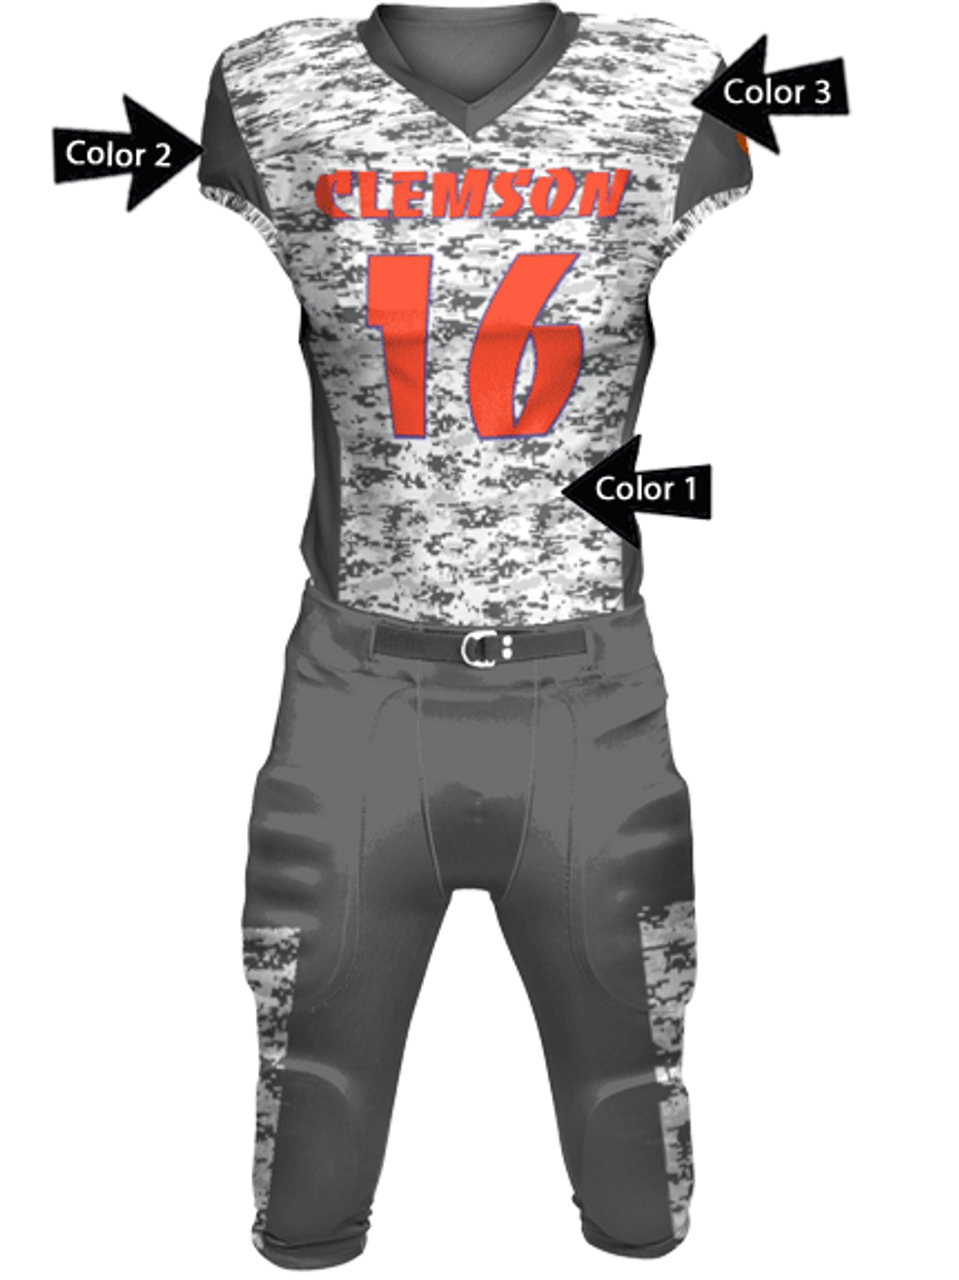 Tiger Camo Black Custom Football Jerseys for Youth & Adults | YoungSpeeds Jersey